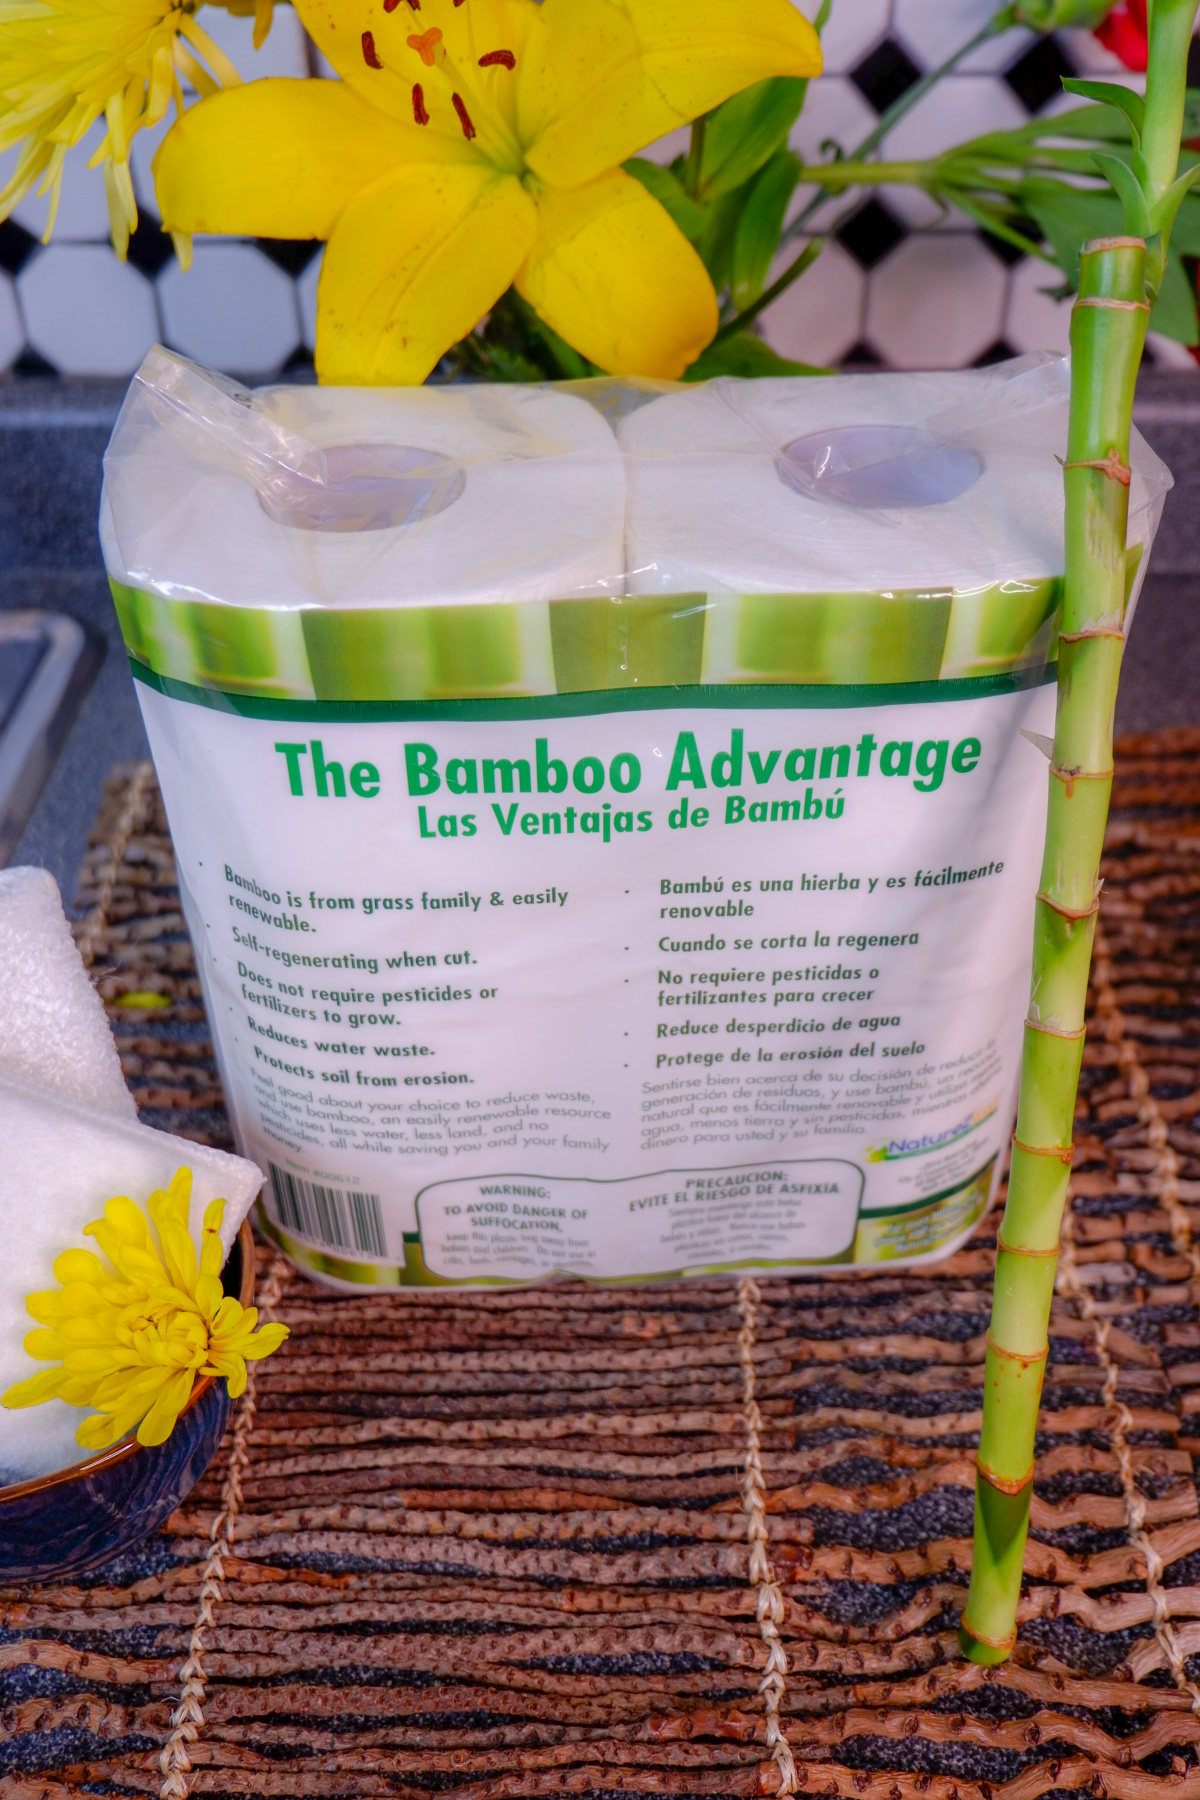 NatureZway Bamboo eco-friendly, renewable resources, bamboo products